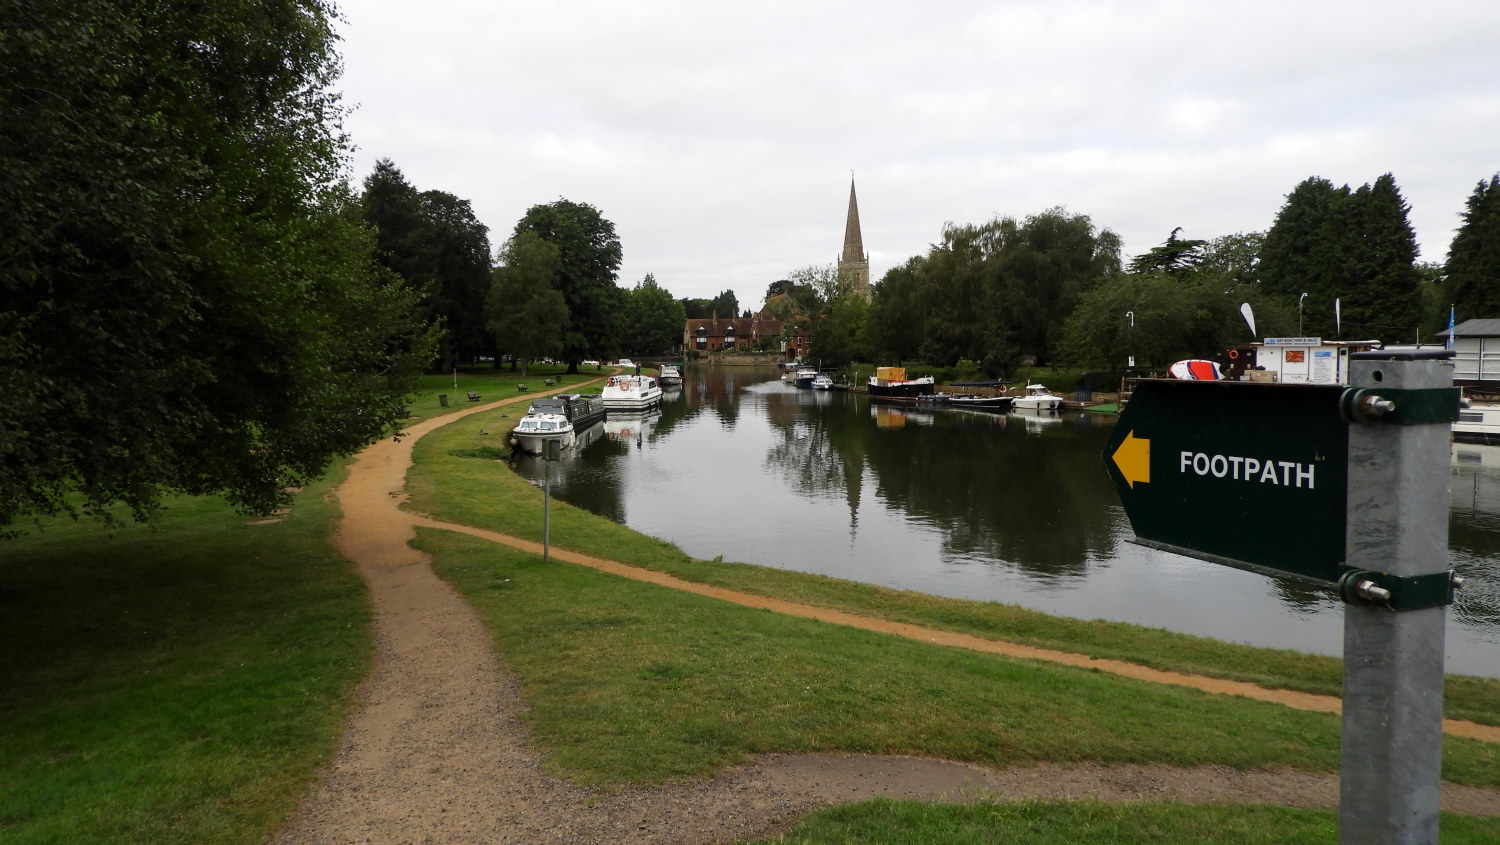 Following the Thames Path from Abingdon